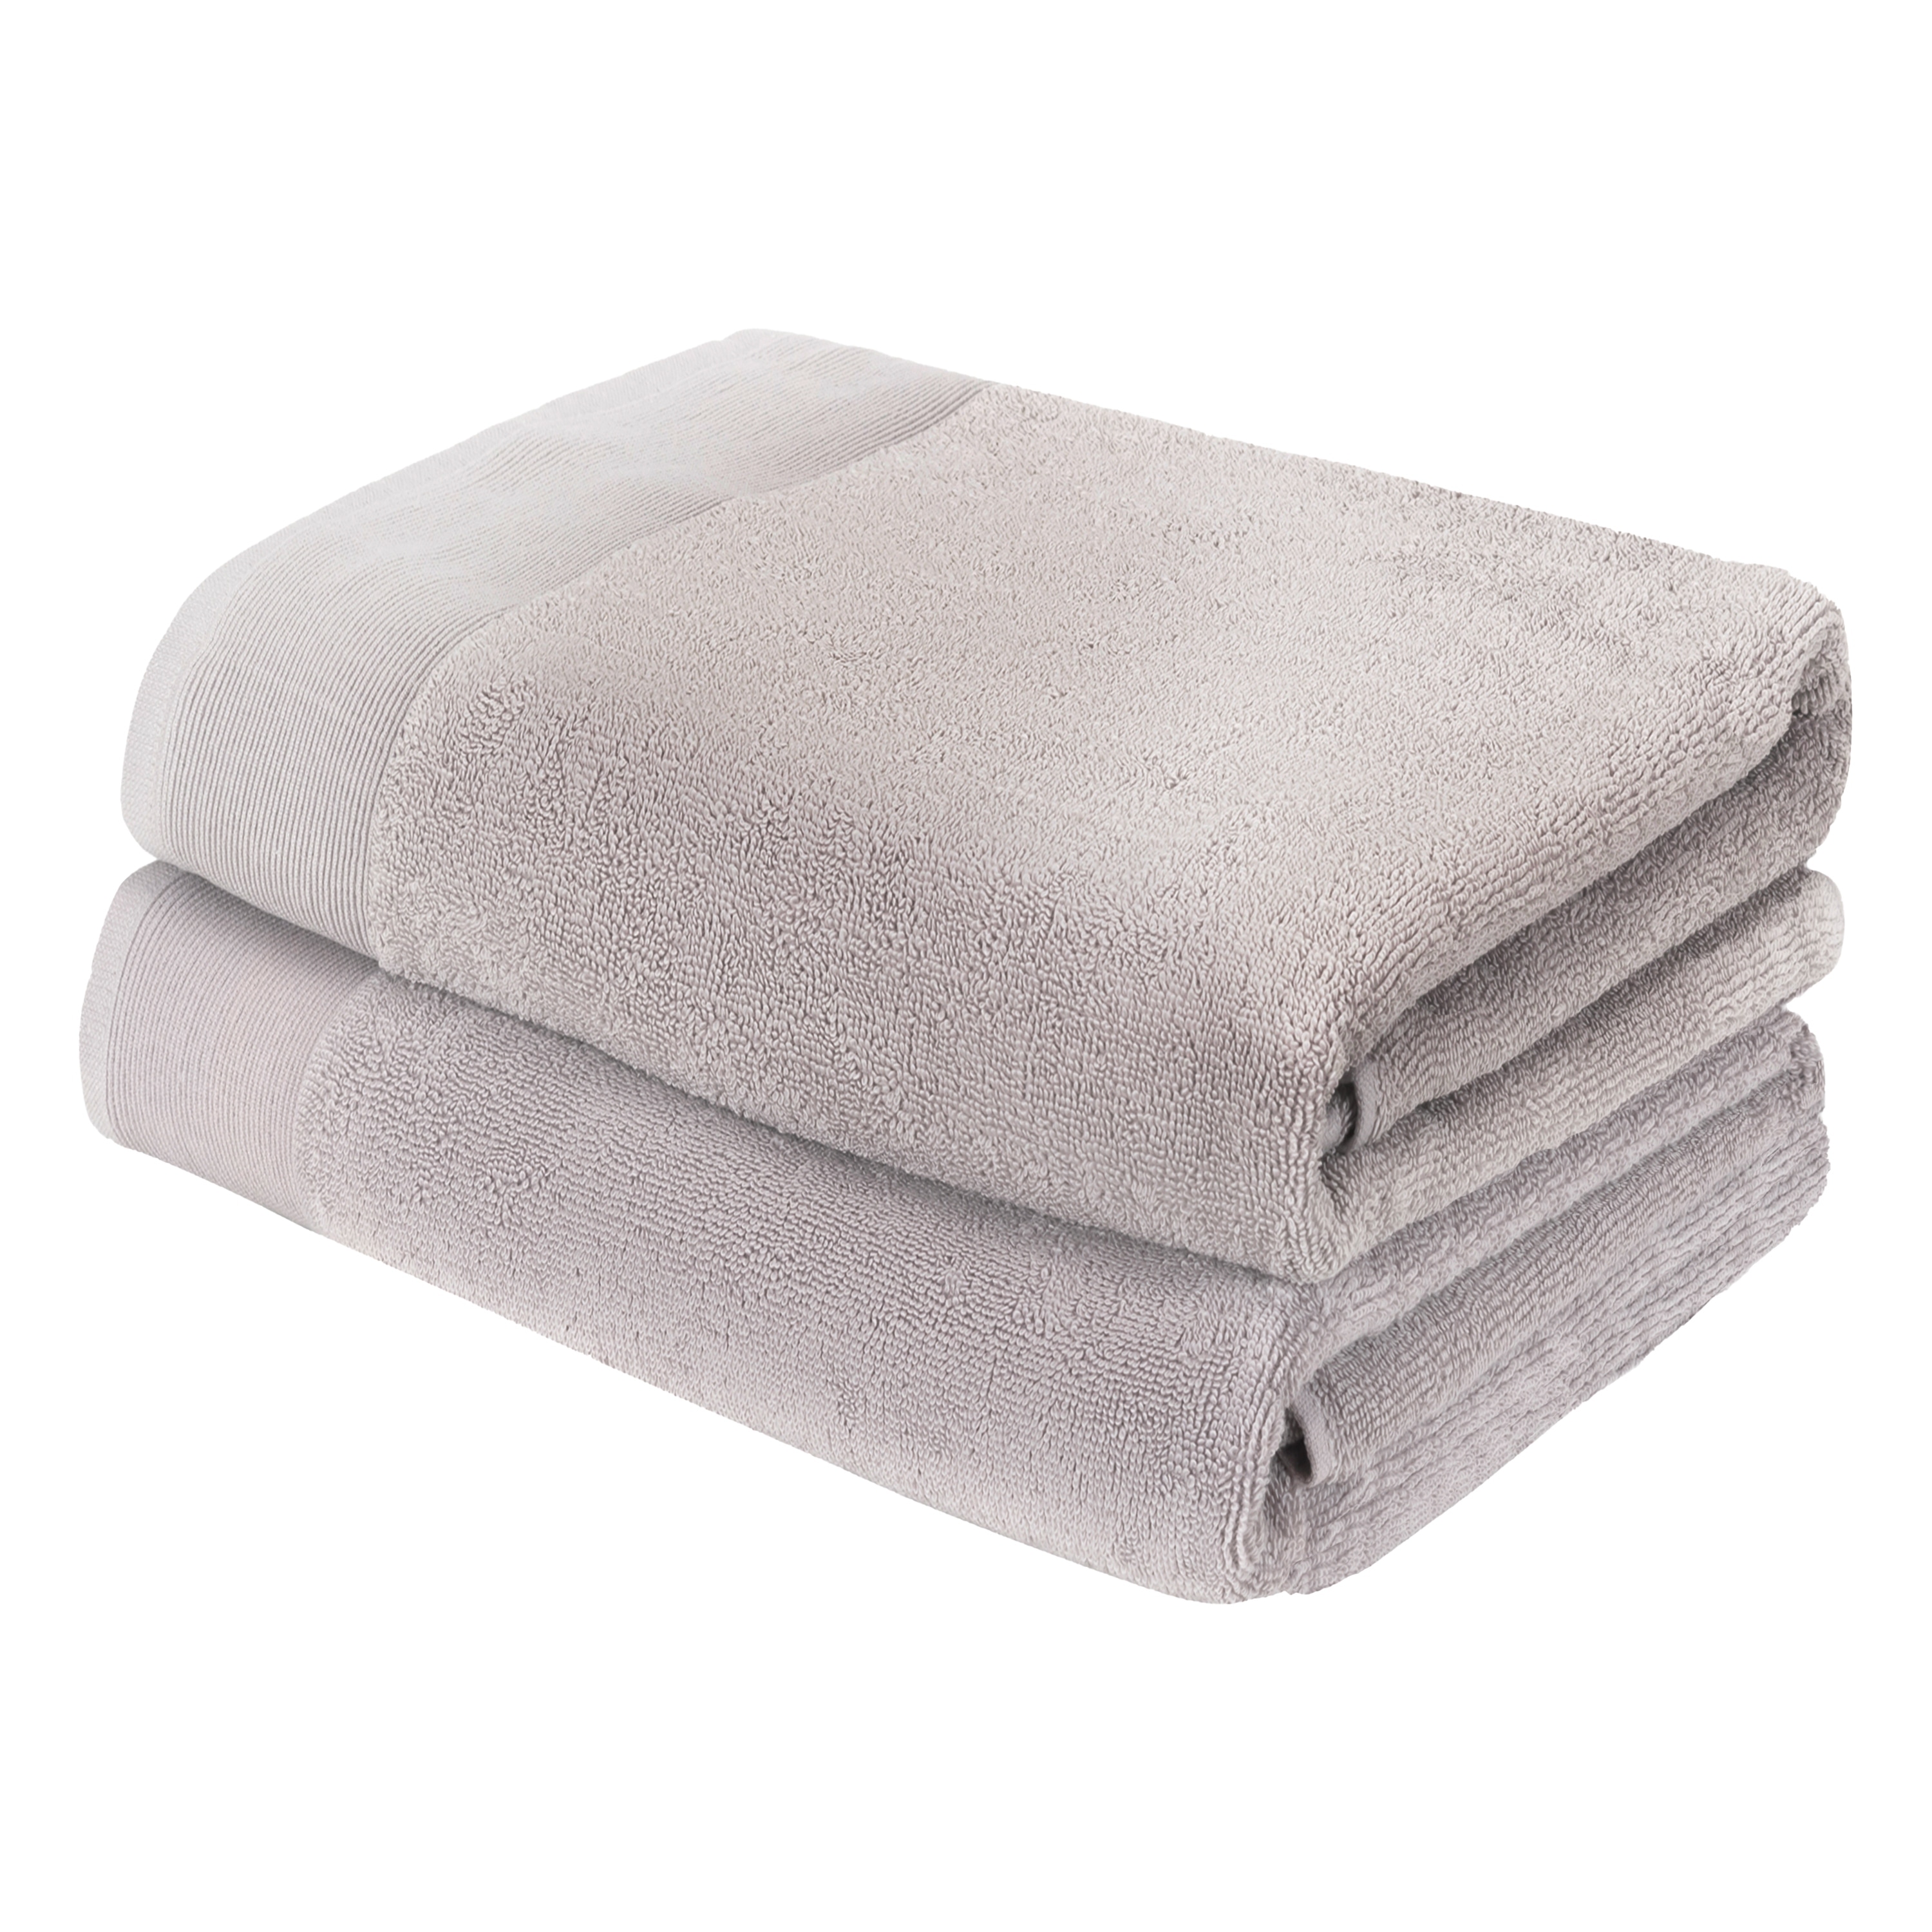  8 Piece Oversized Gray Bath Towel Set-2 Extra Large Bath Towel  Sheets,2 Hand Towels,4 Washcloths-600GSM Soft Highly Absorbent Quick Dry  Beach Chair Towels Woven Towels for Bathroom Hotel and Spa 